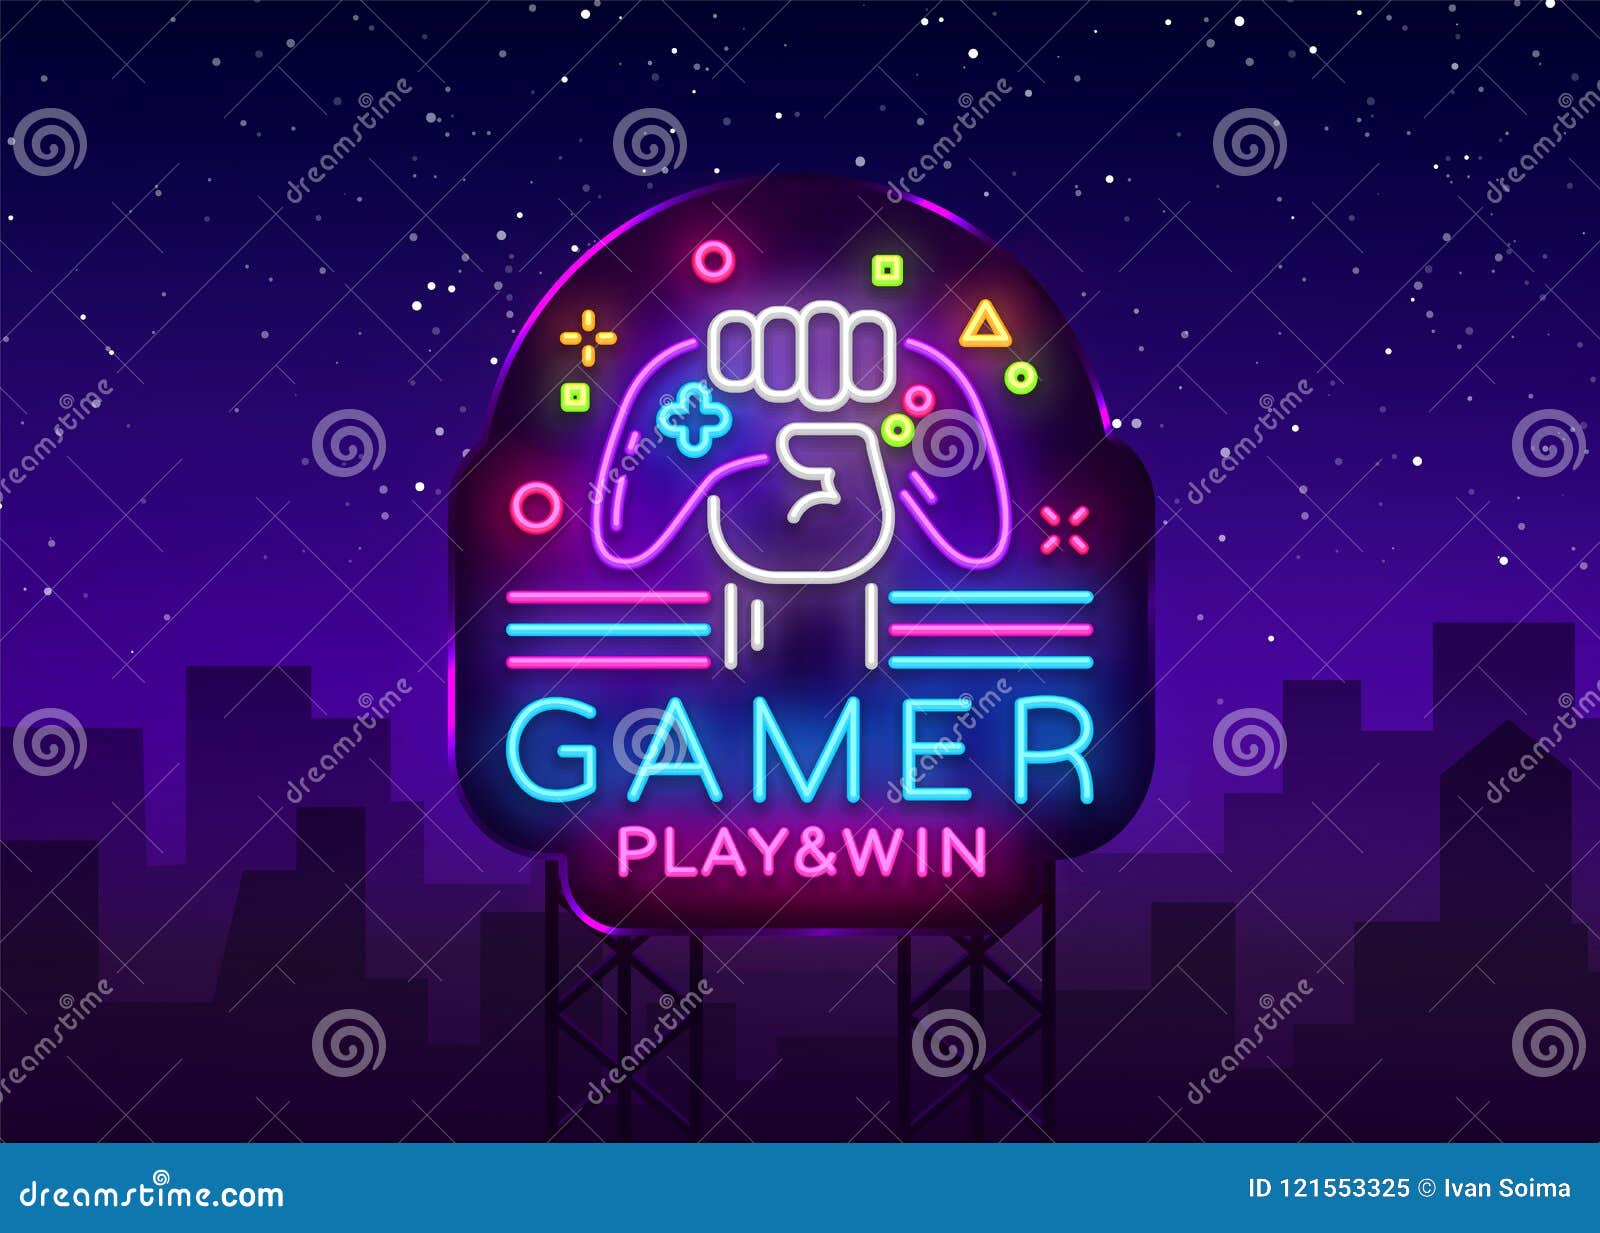 Gamer Play Win Logo Neon Sign Vector Logo Design Template Game Night Logo In Neon Style Gamepad In Hand Modern Trend Stock Vector Illustration Of Logo Controller